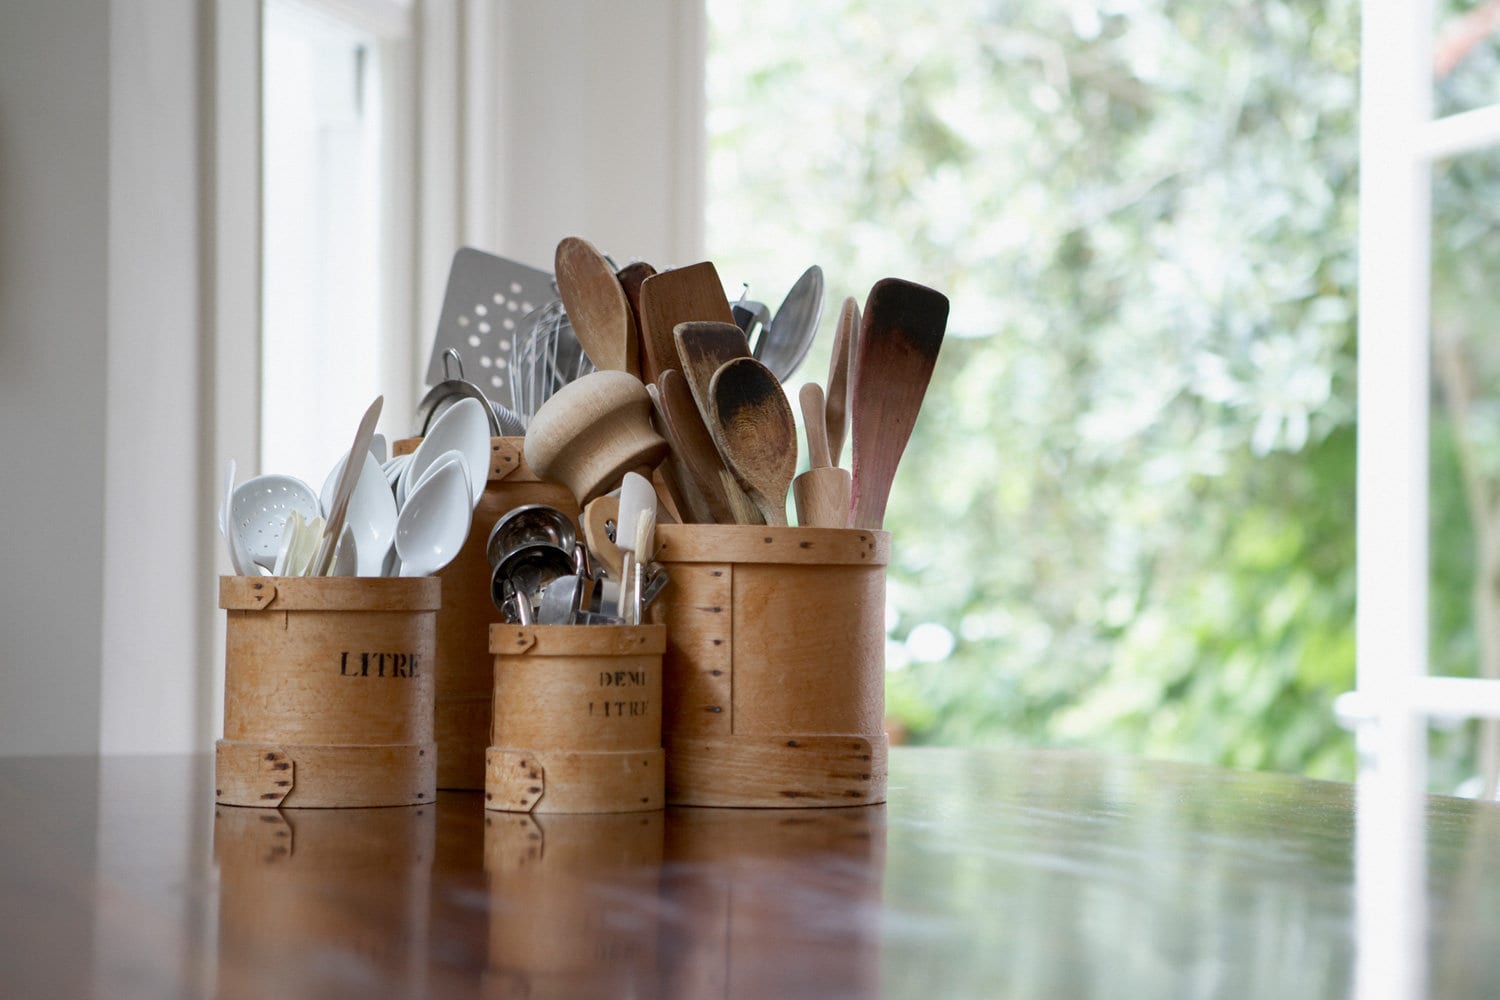 Kitchen utensils in containers on table